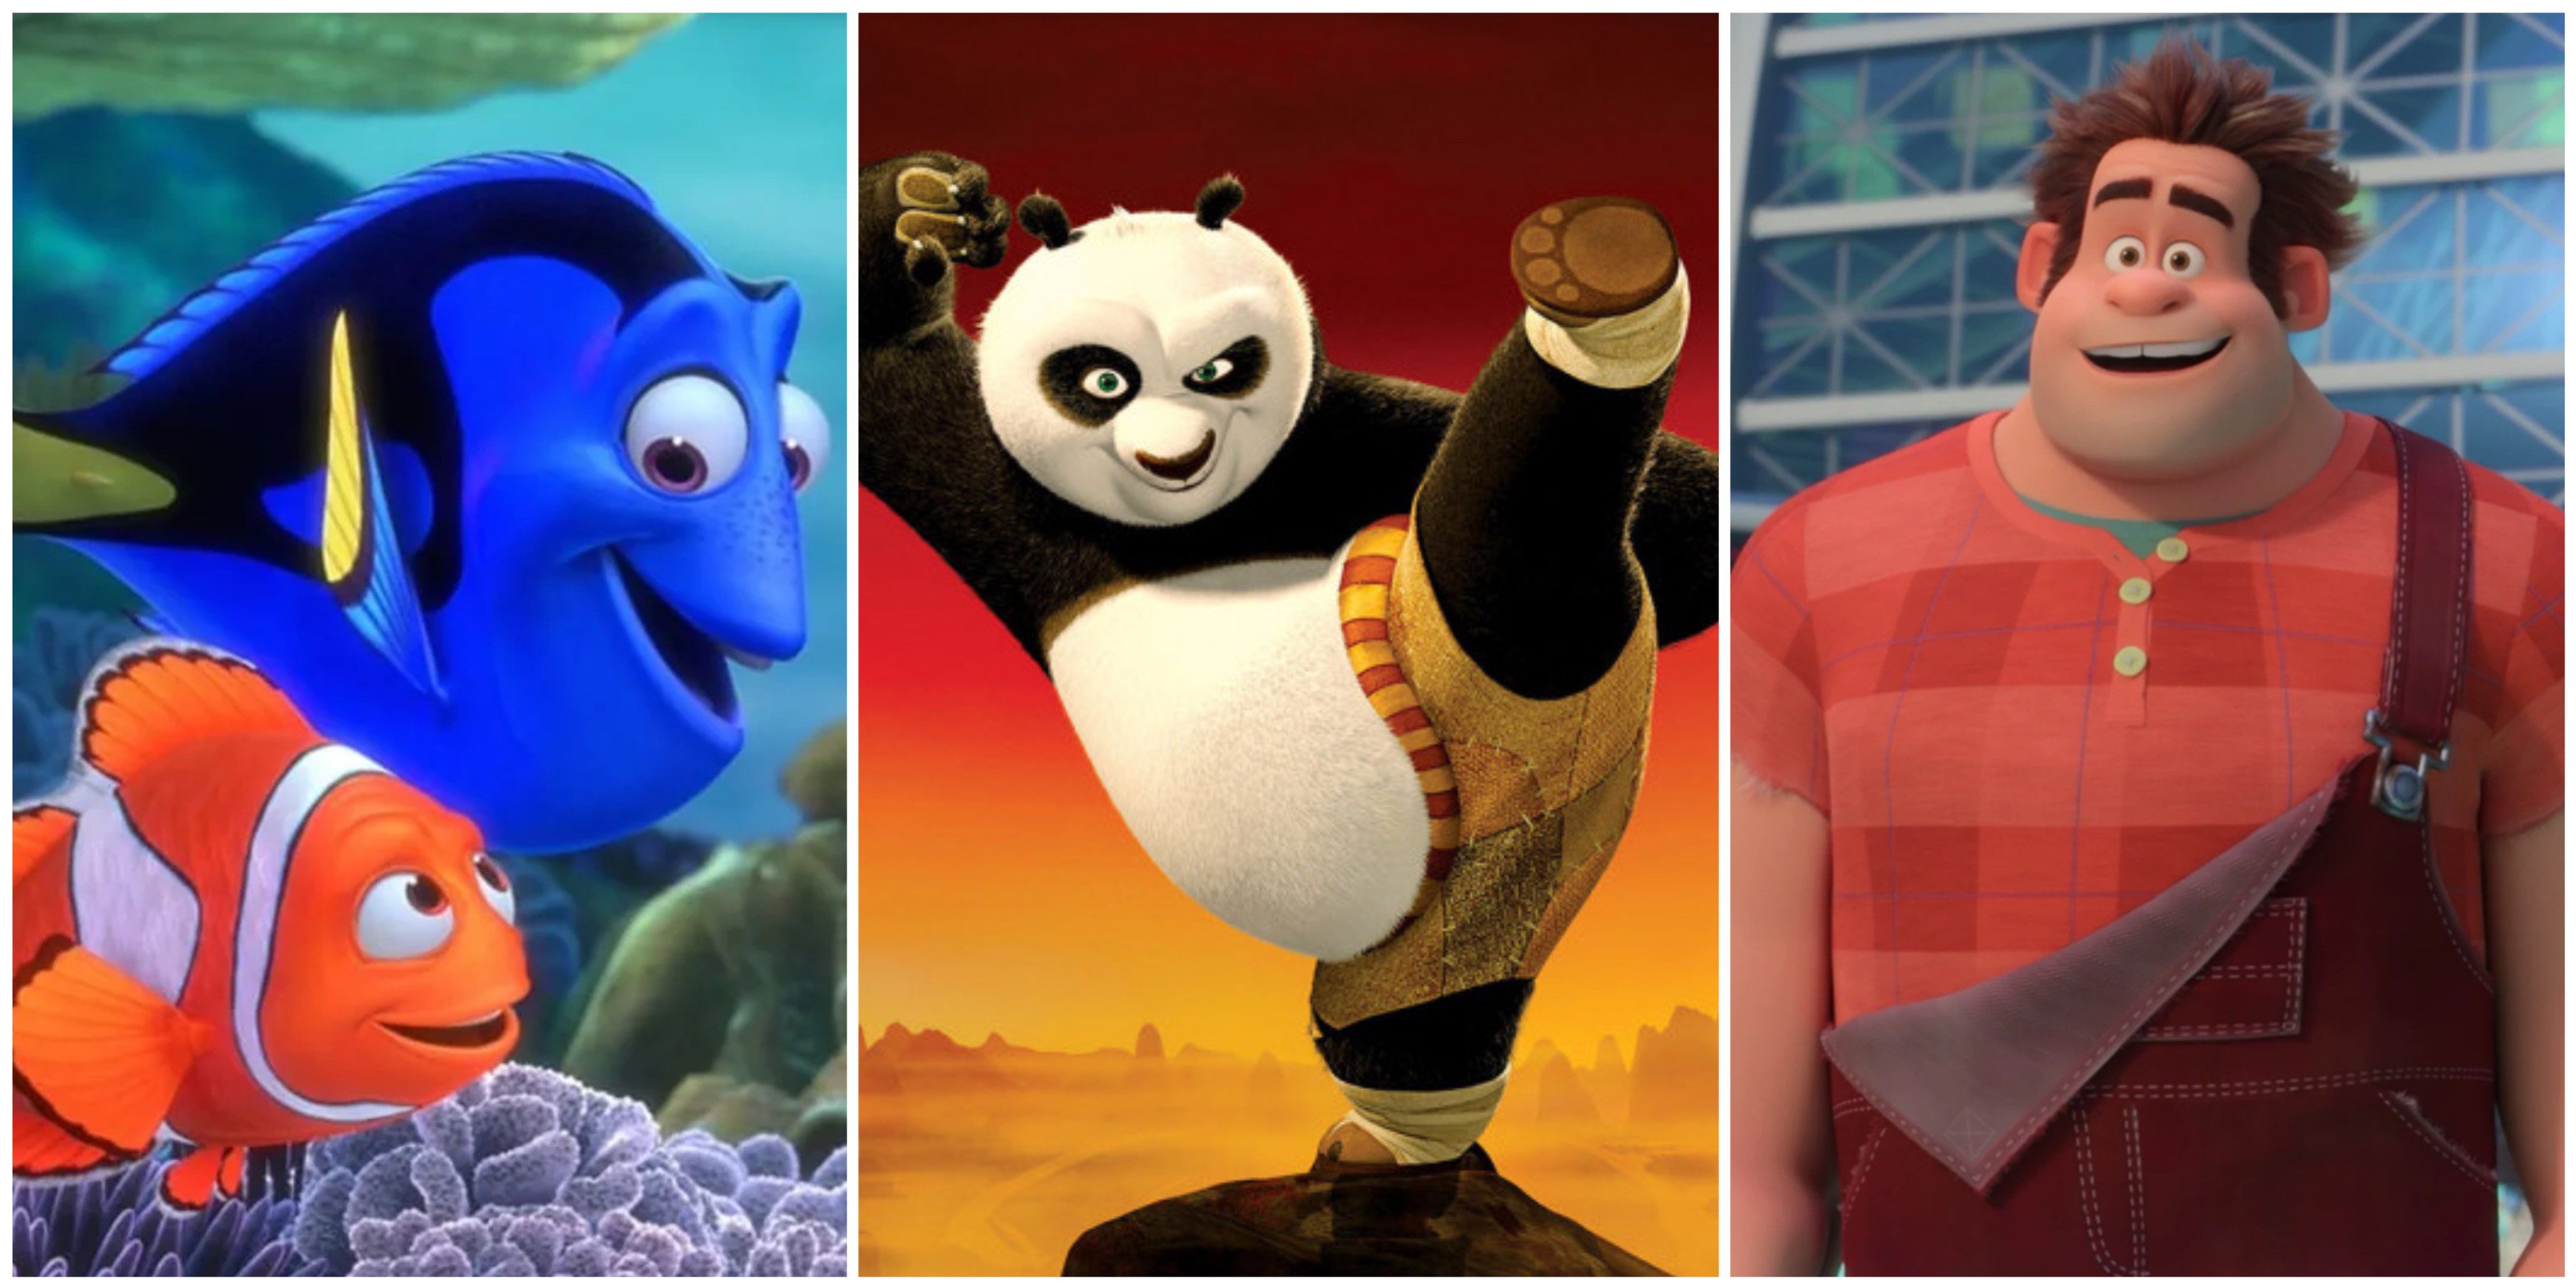 Dory and Marlin from Finding Nemo, Kung Fu Panda, & Wreck-It Ralph